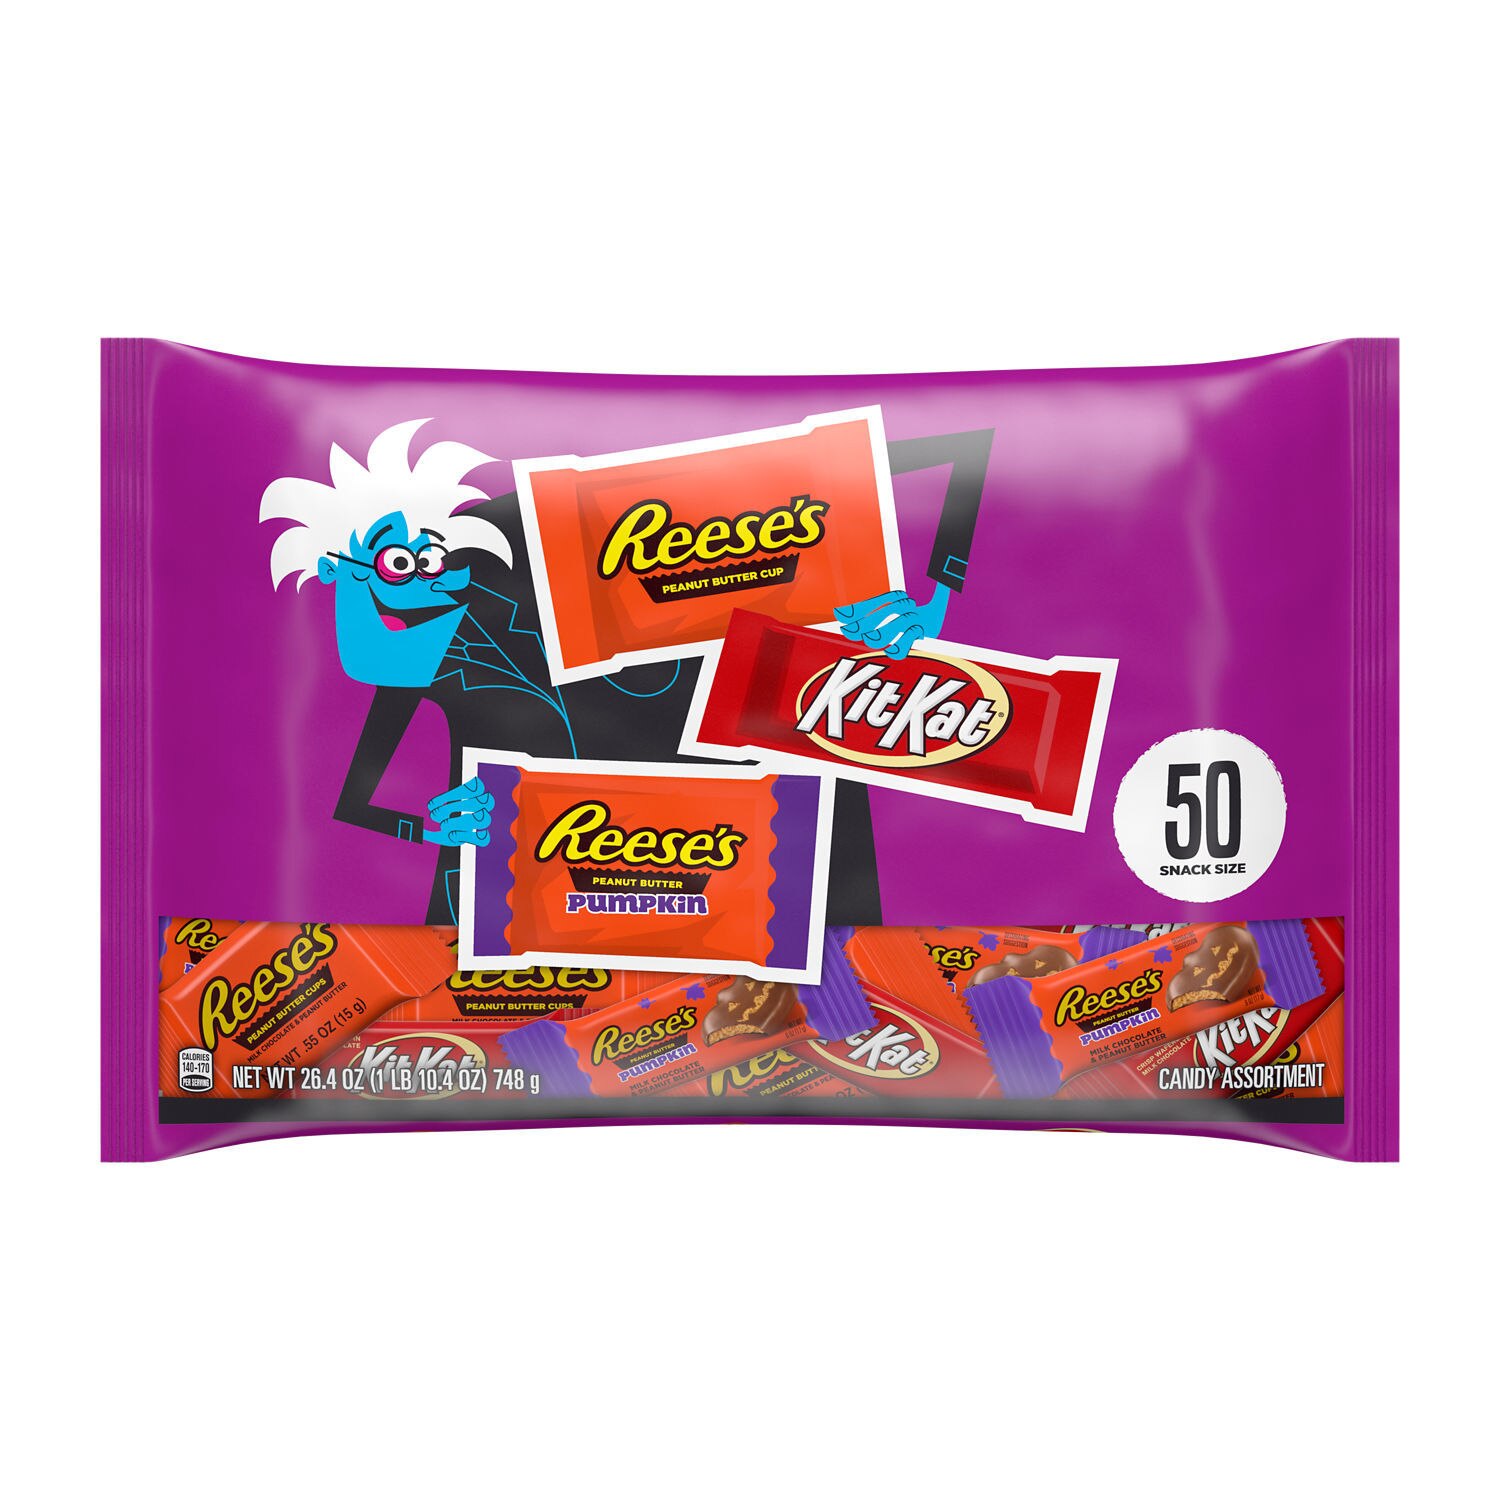 Hershey Assorted Milk Chocolate and Peanut Butter Flavors Snack Size, Halloween Candy Variety Bag, 50 ct, 26.40 oz